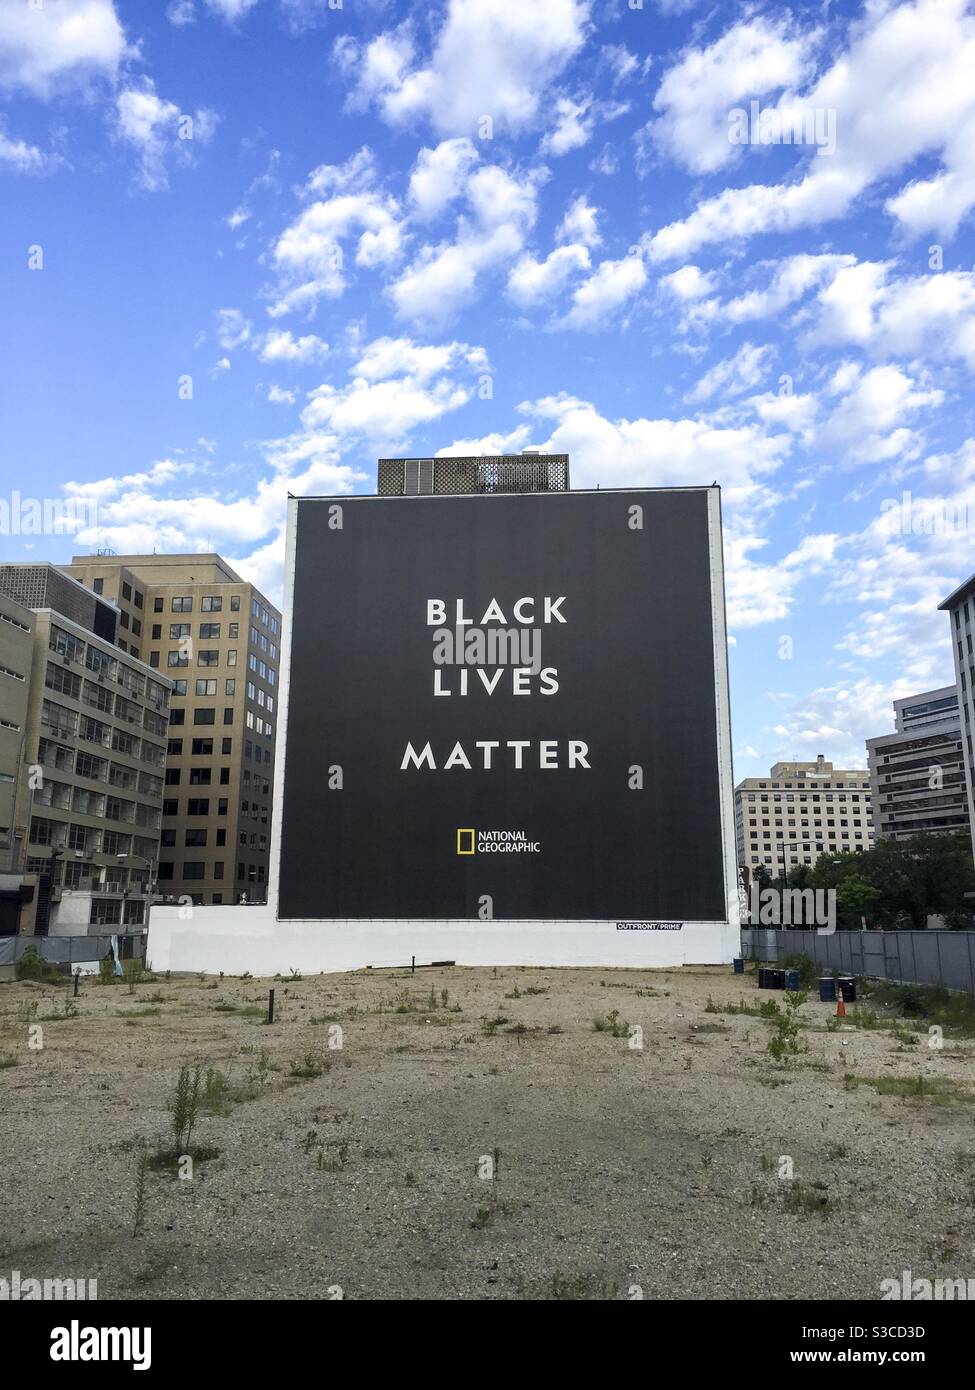 A Black Lives Matter sign covers the side of a building in Washington DC. Stock Photo